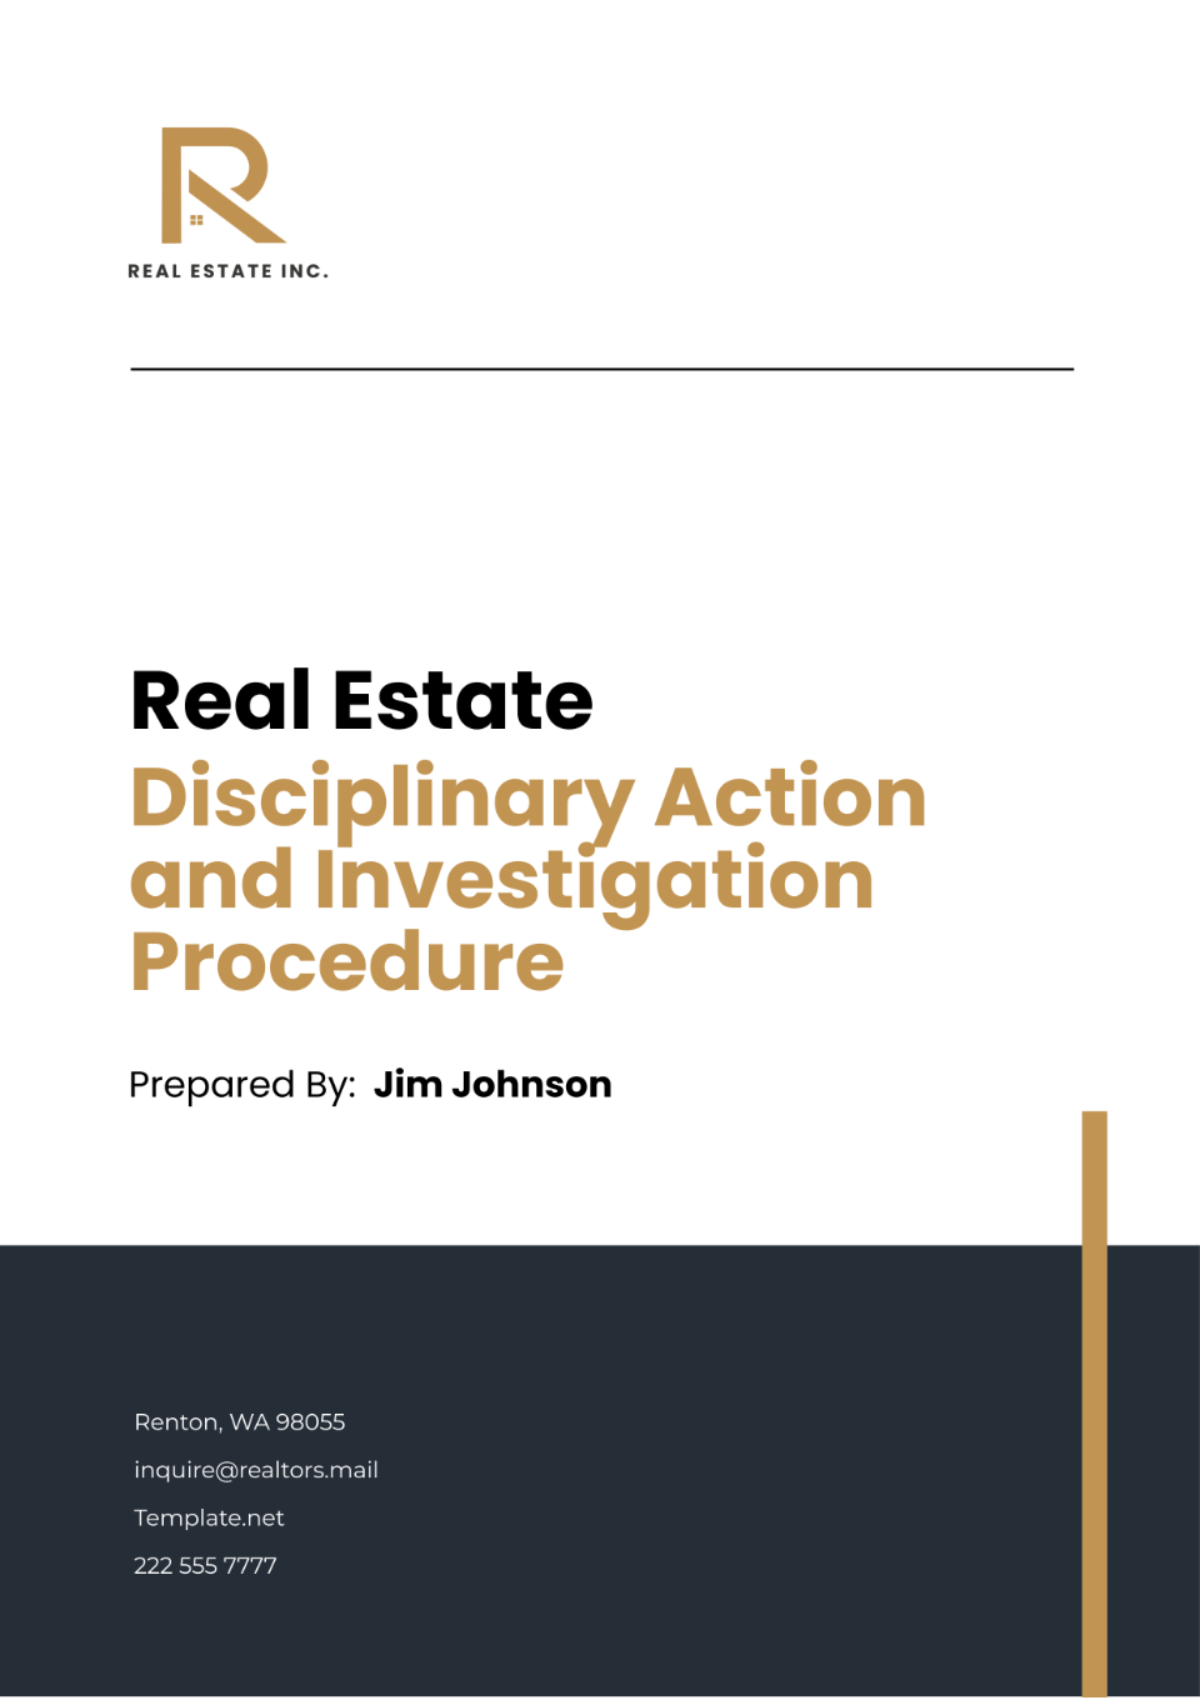 Real Estate Disciplinary Action and Investigation Procedure Template